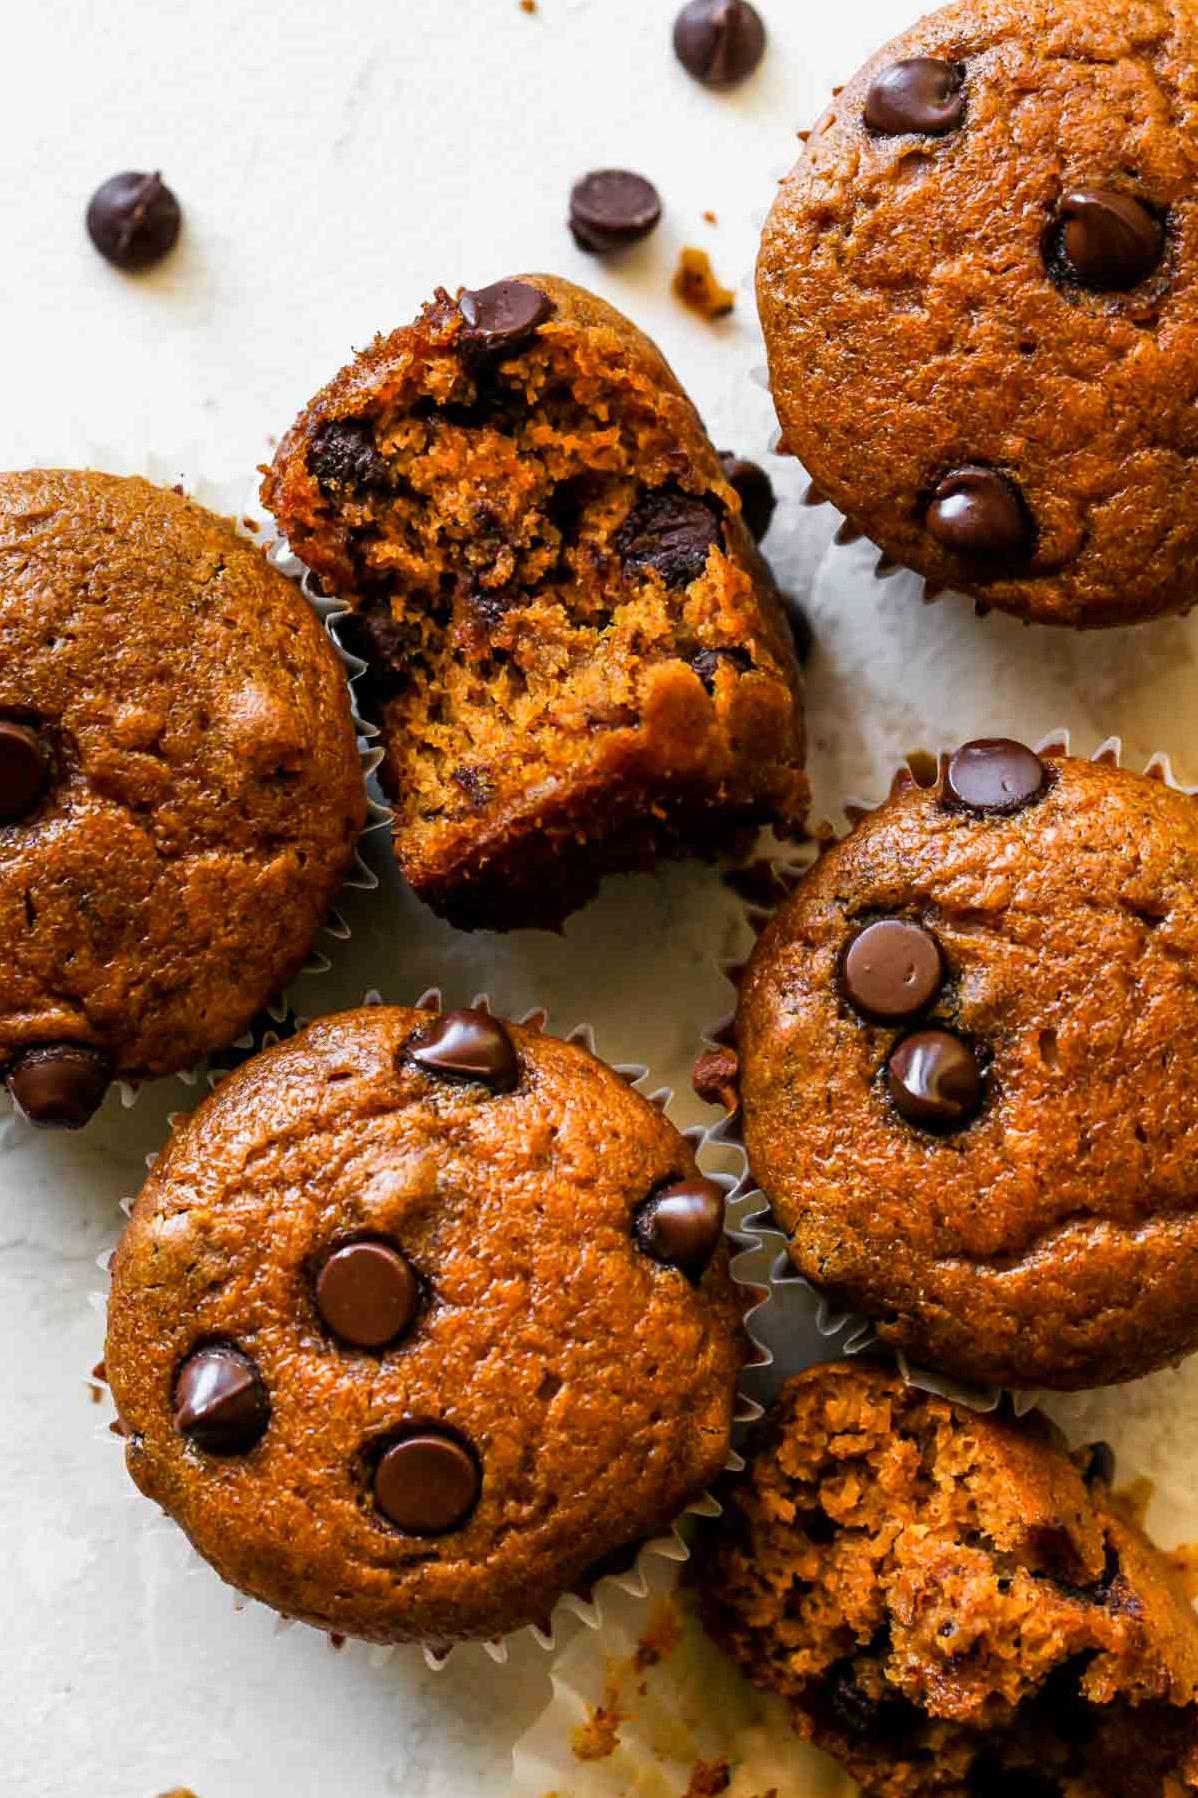  These muffins will satisfy your pumpkin craving with a touch of chocolate goodness.